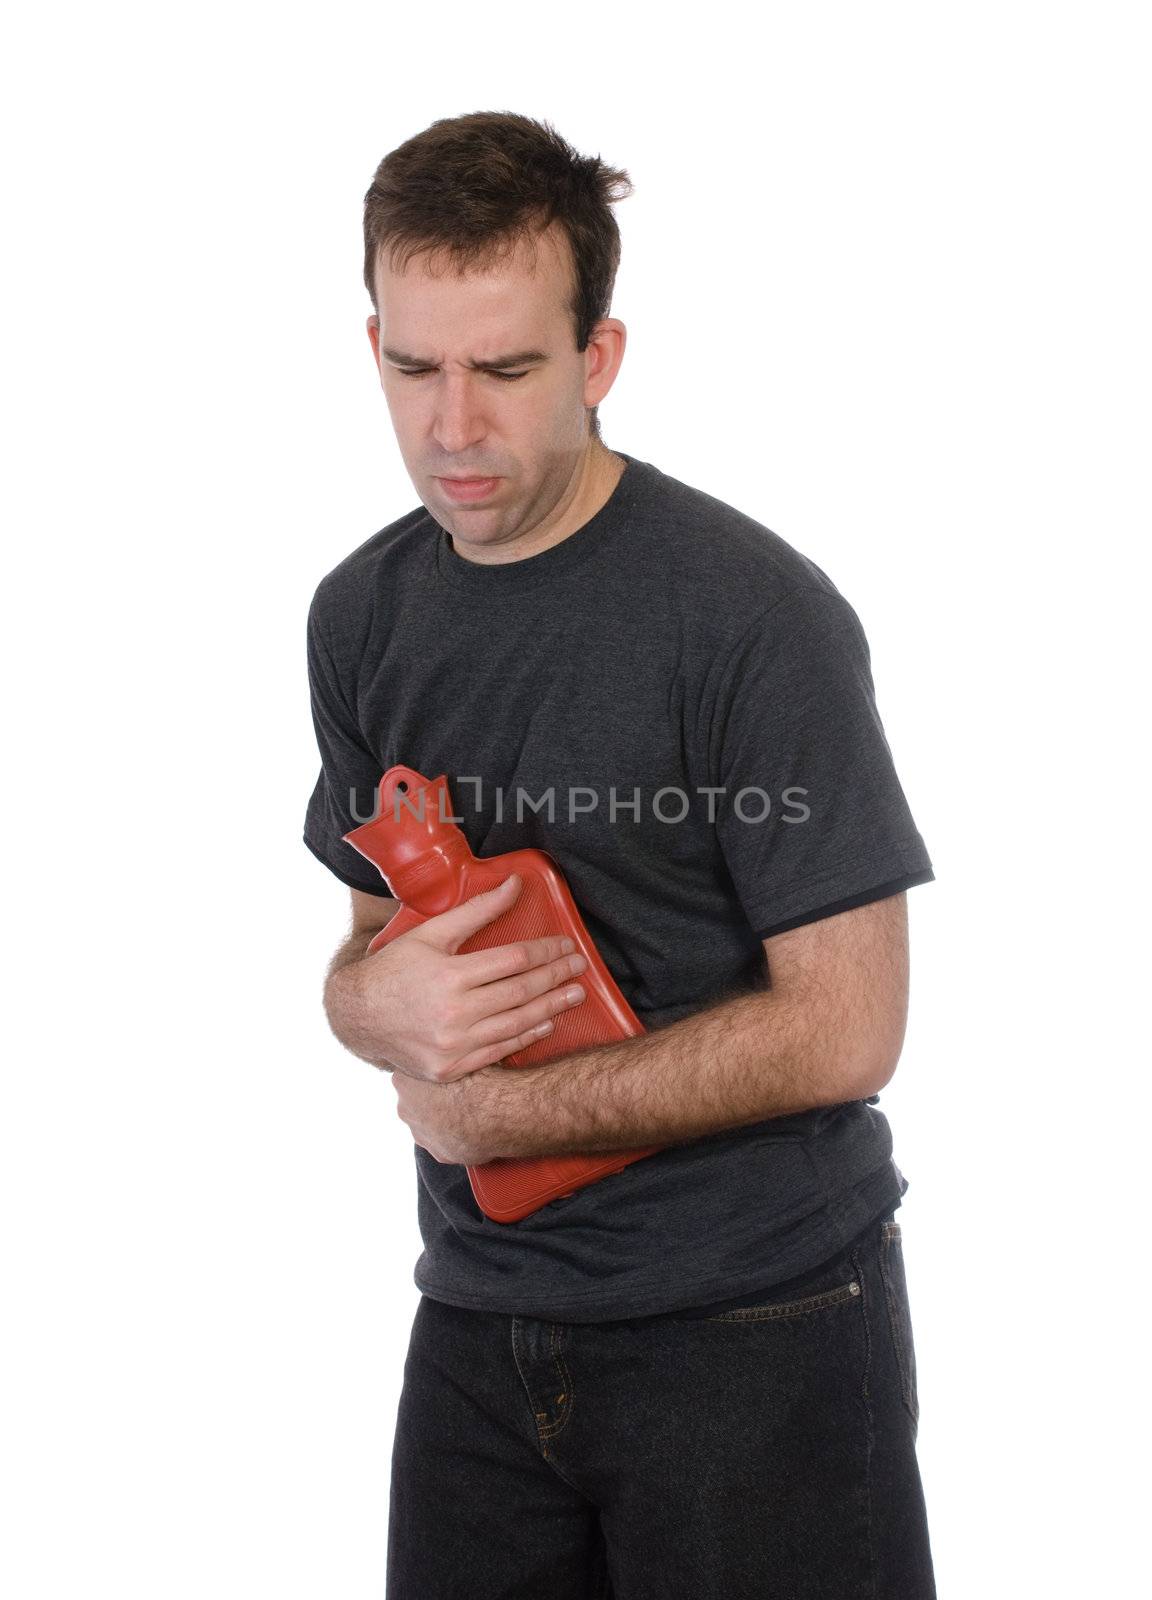 A young man with a stomach ache is holding a hot water bottle to his belly, isolated against a white background